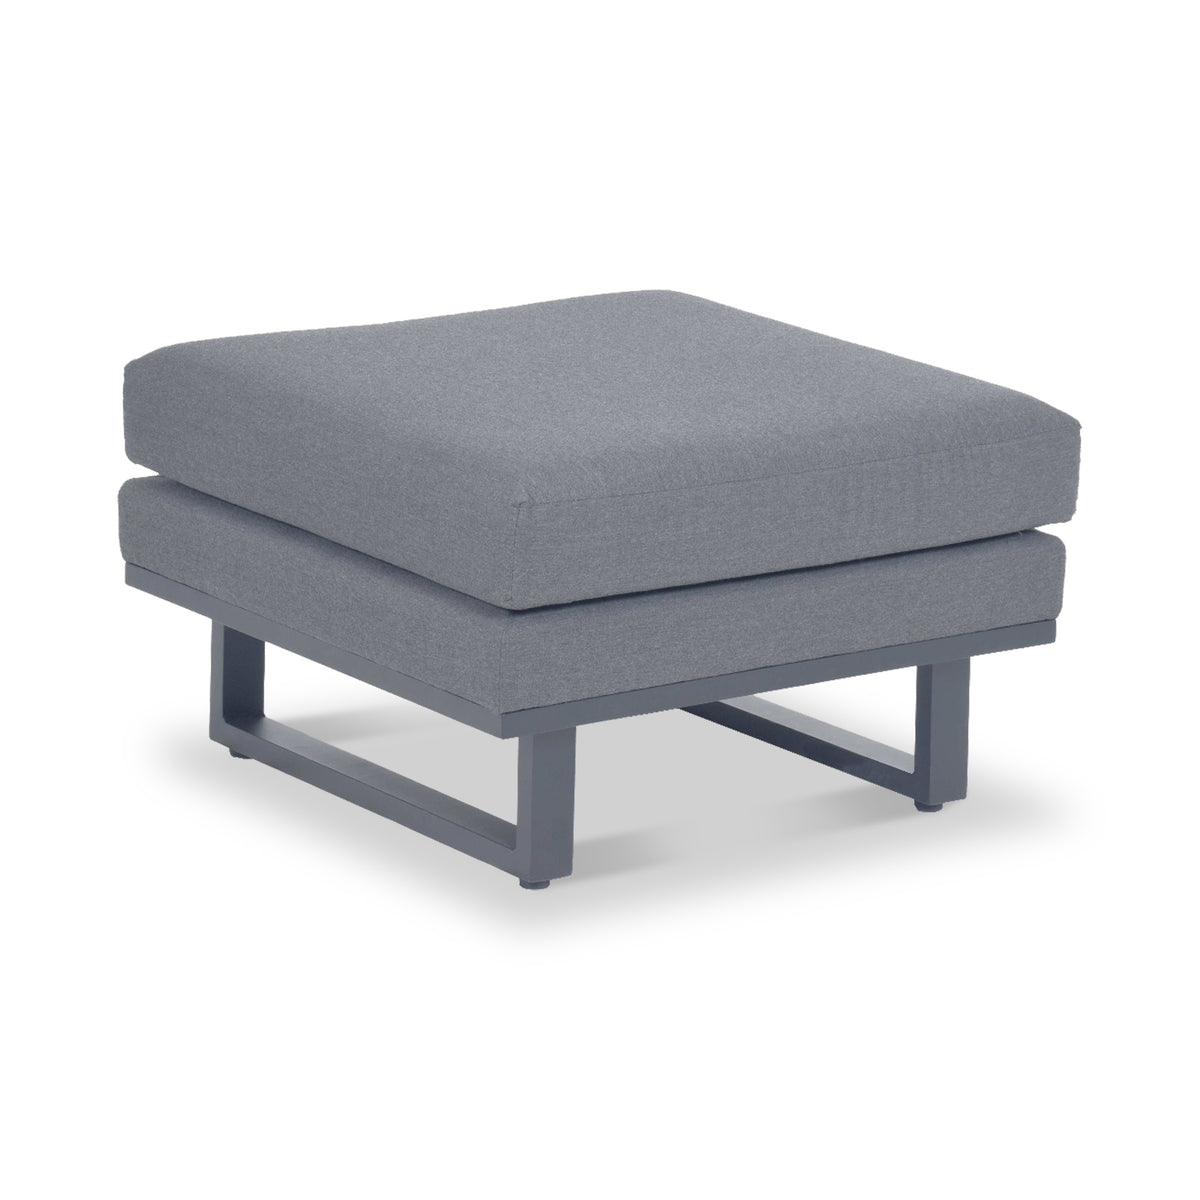 Maze Ethos Flanelle Grey Outdoor Footstool from Roseland Furniture